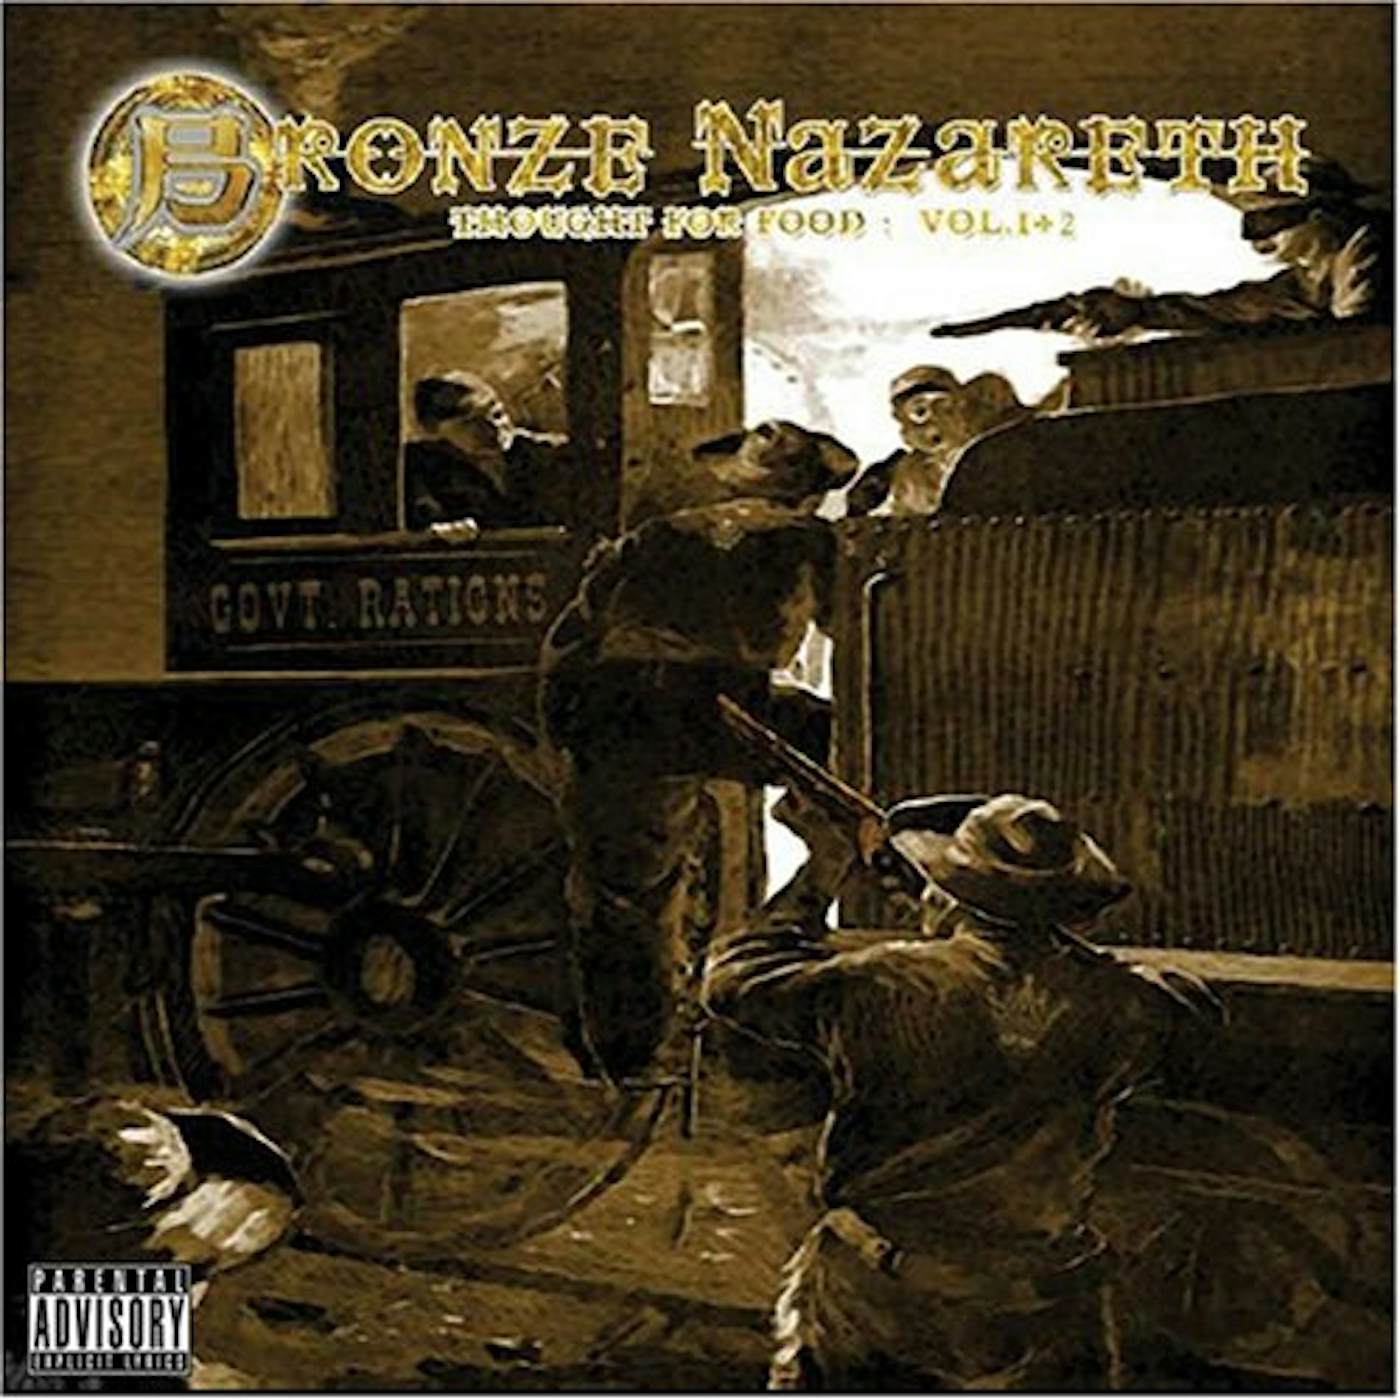 Bronze Nazareth THOUGHT FOR FOOD 1 & 2 CD